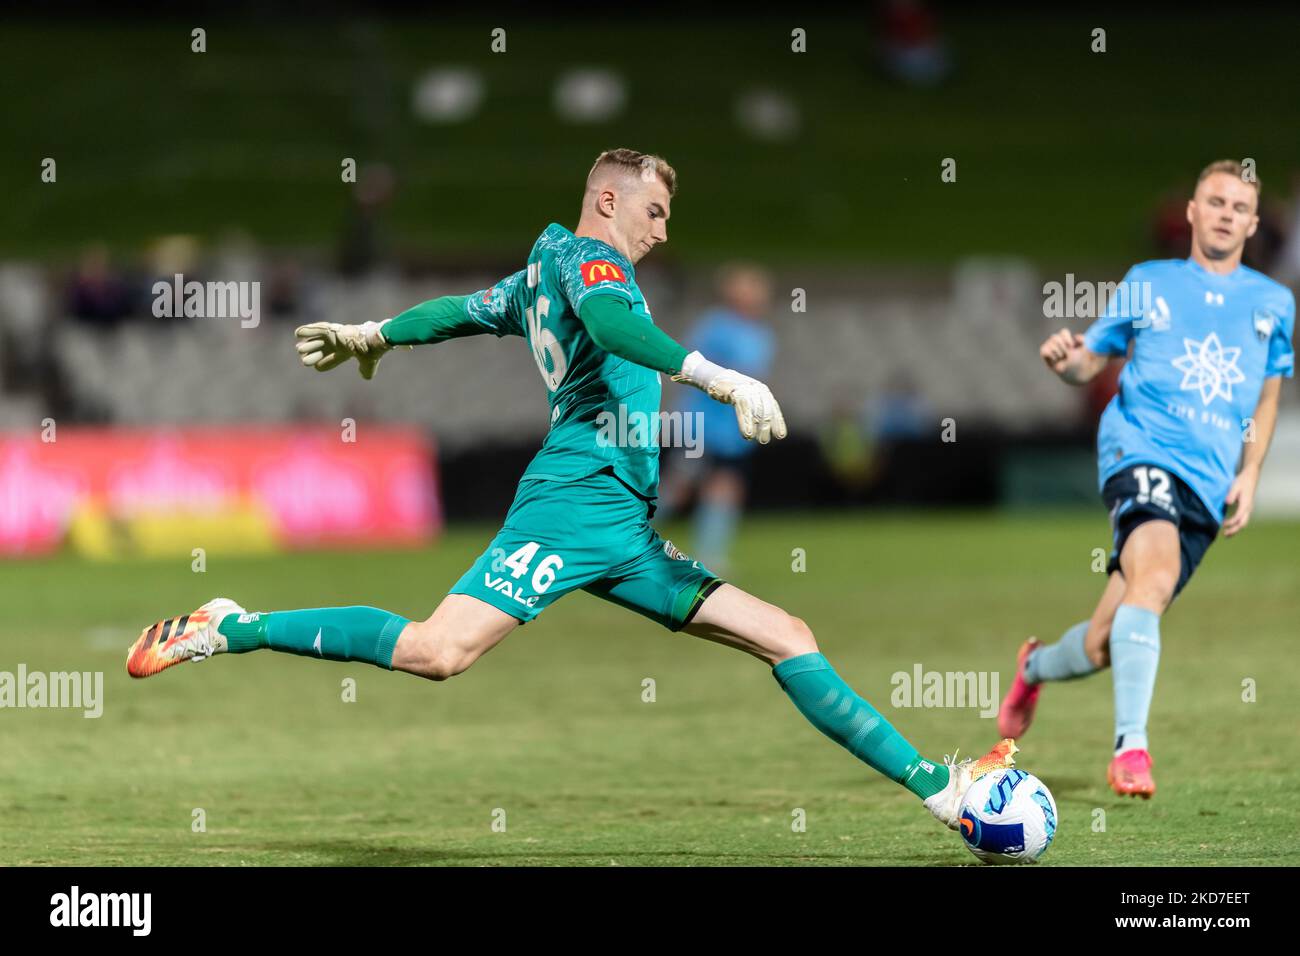 Joe Gauci (Gk) of Adelaide United F.C. in action during the A-League match between Sydney FC and Adelaide United FC at Netstrata Jubilee Stadium, on April 12, 2022, in Sydney, Australia.(Photo by Izhar Ahmed Khan/NurPhoto) Stock Photo